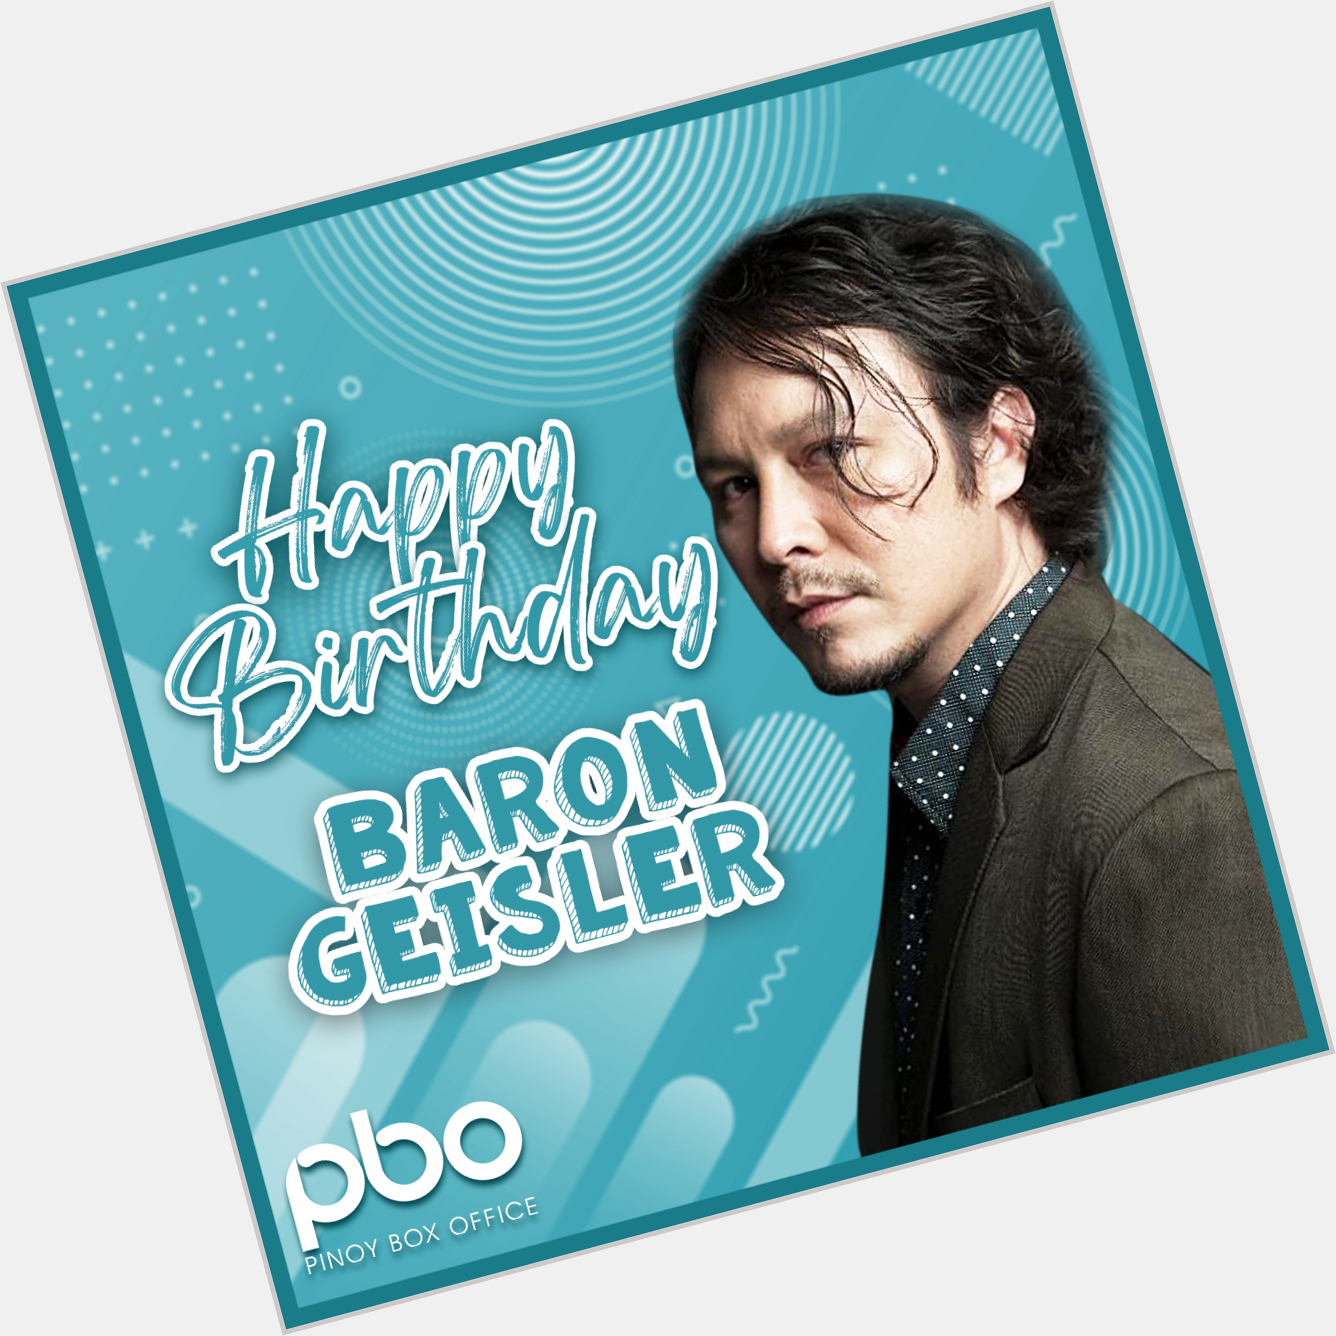 Happy birthday, Baron Geisler! Wishing you a day filled with happiness and plenty of love! 